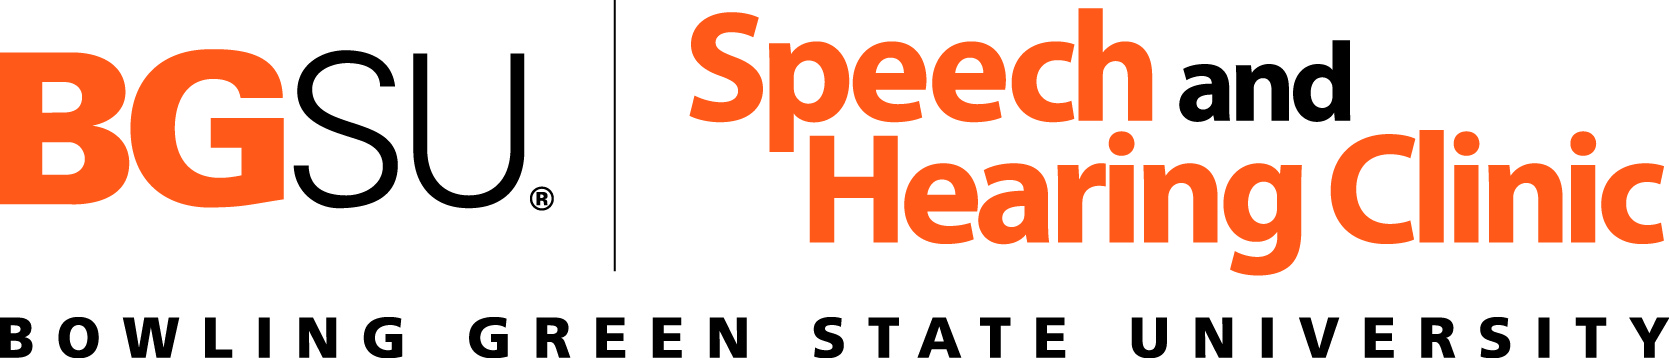 BGSU Speech and Hearing Clinic. Open to the public. Serving all ages.